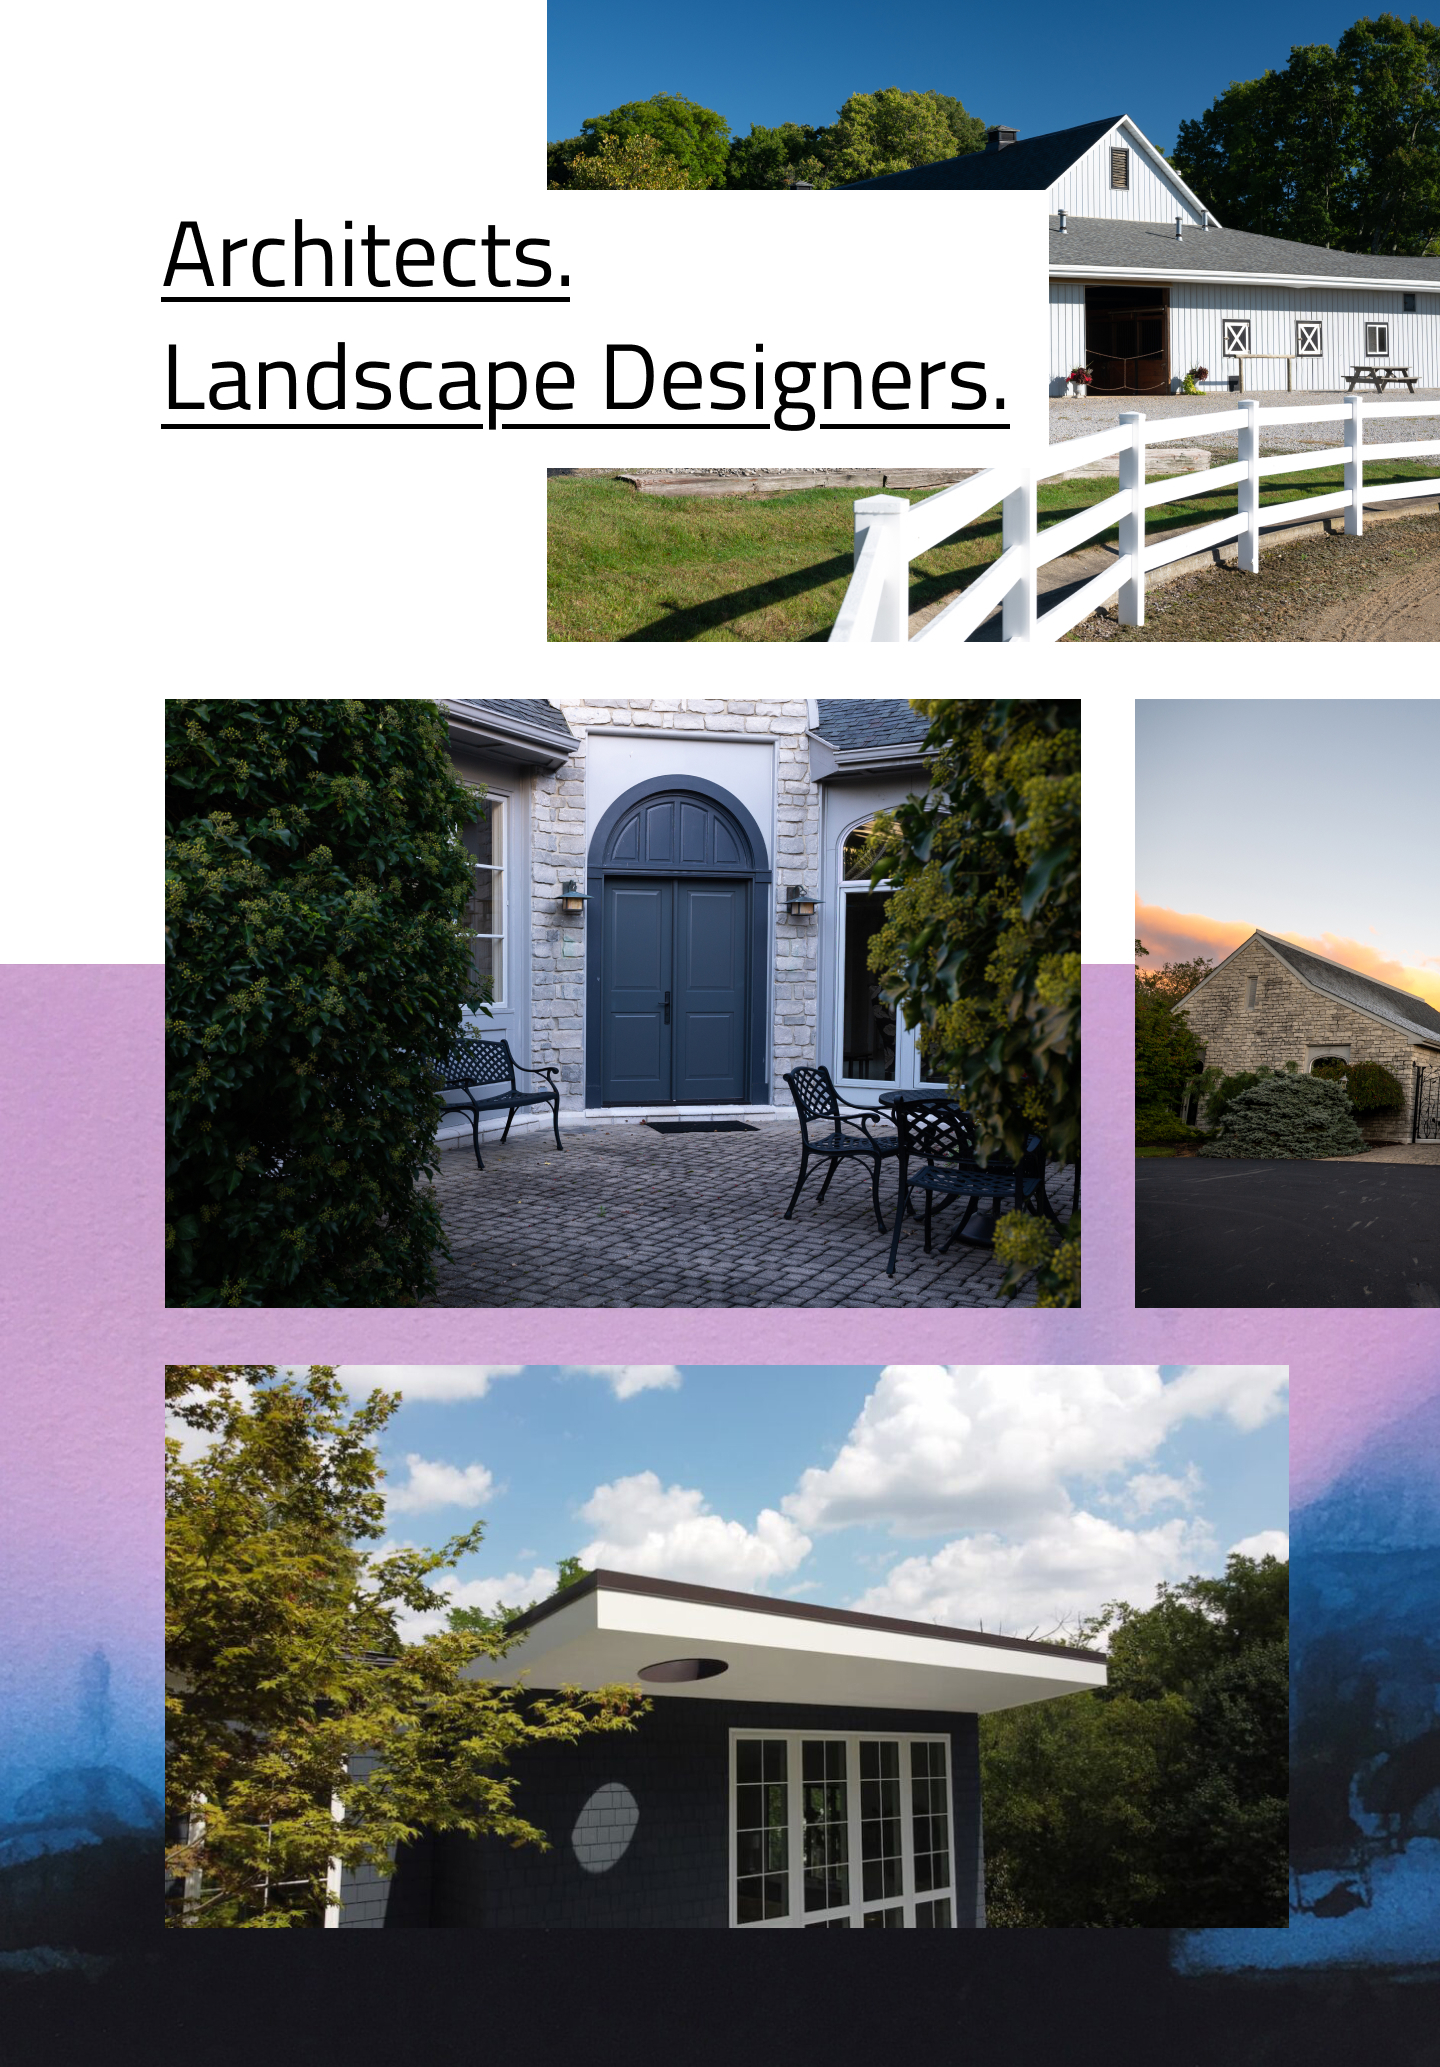 Images of various architectural styles that were used to inspire Cite Studio's website design